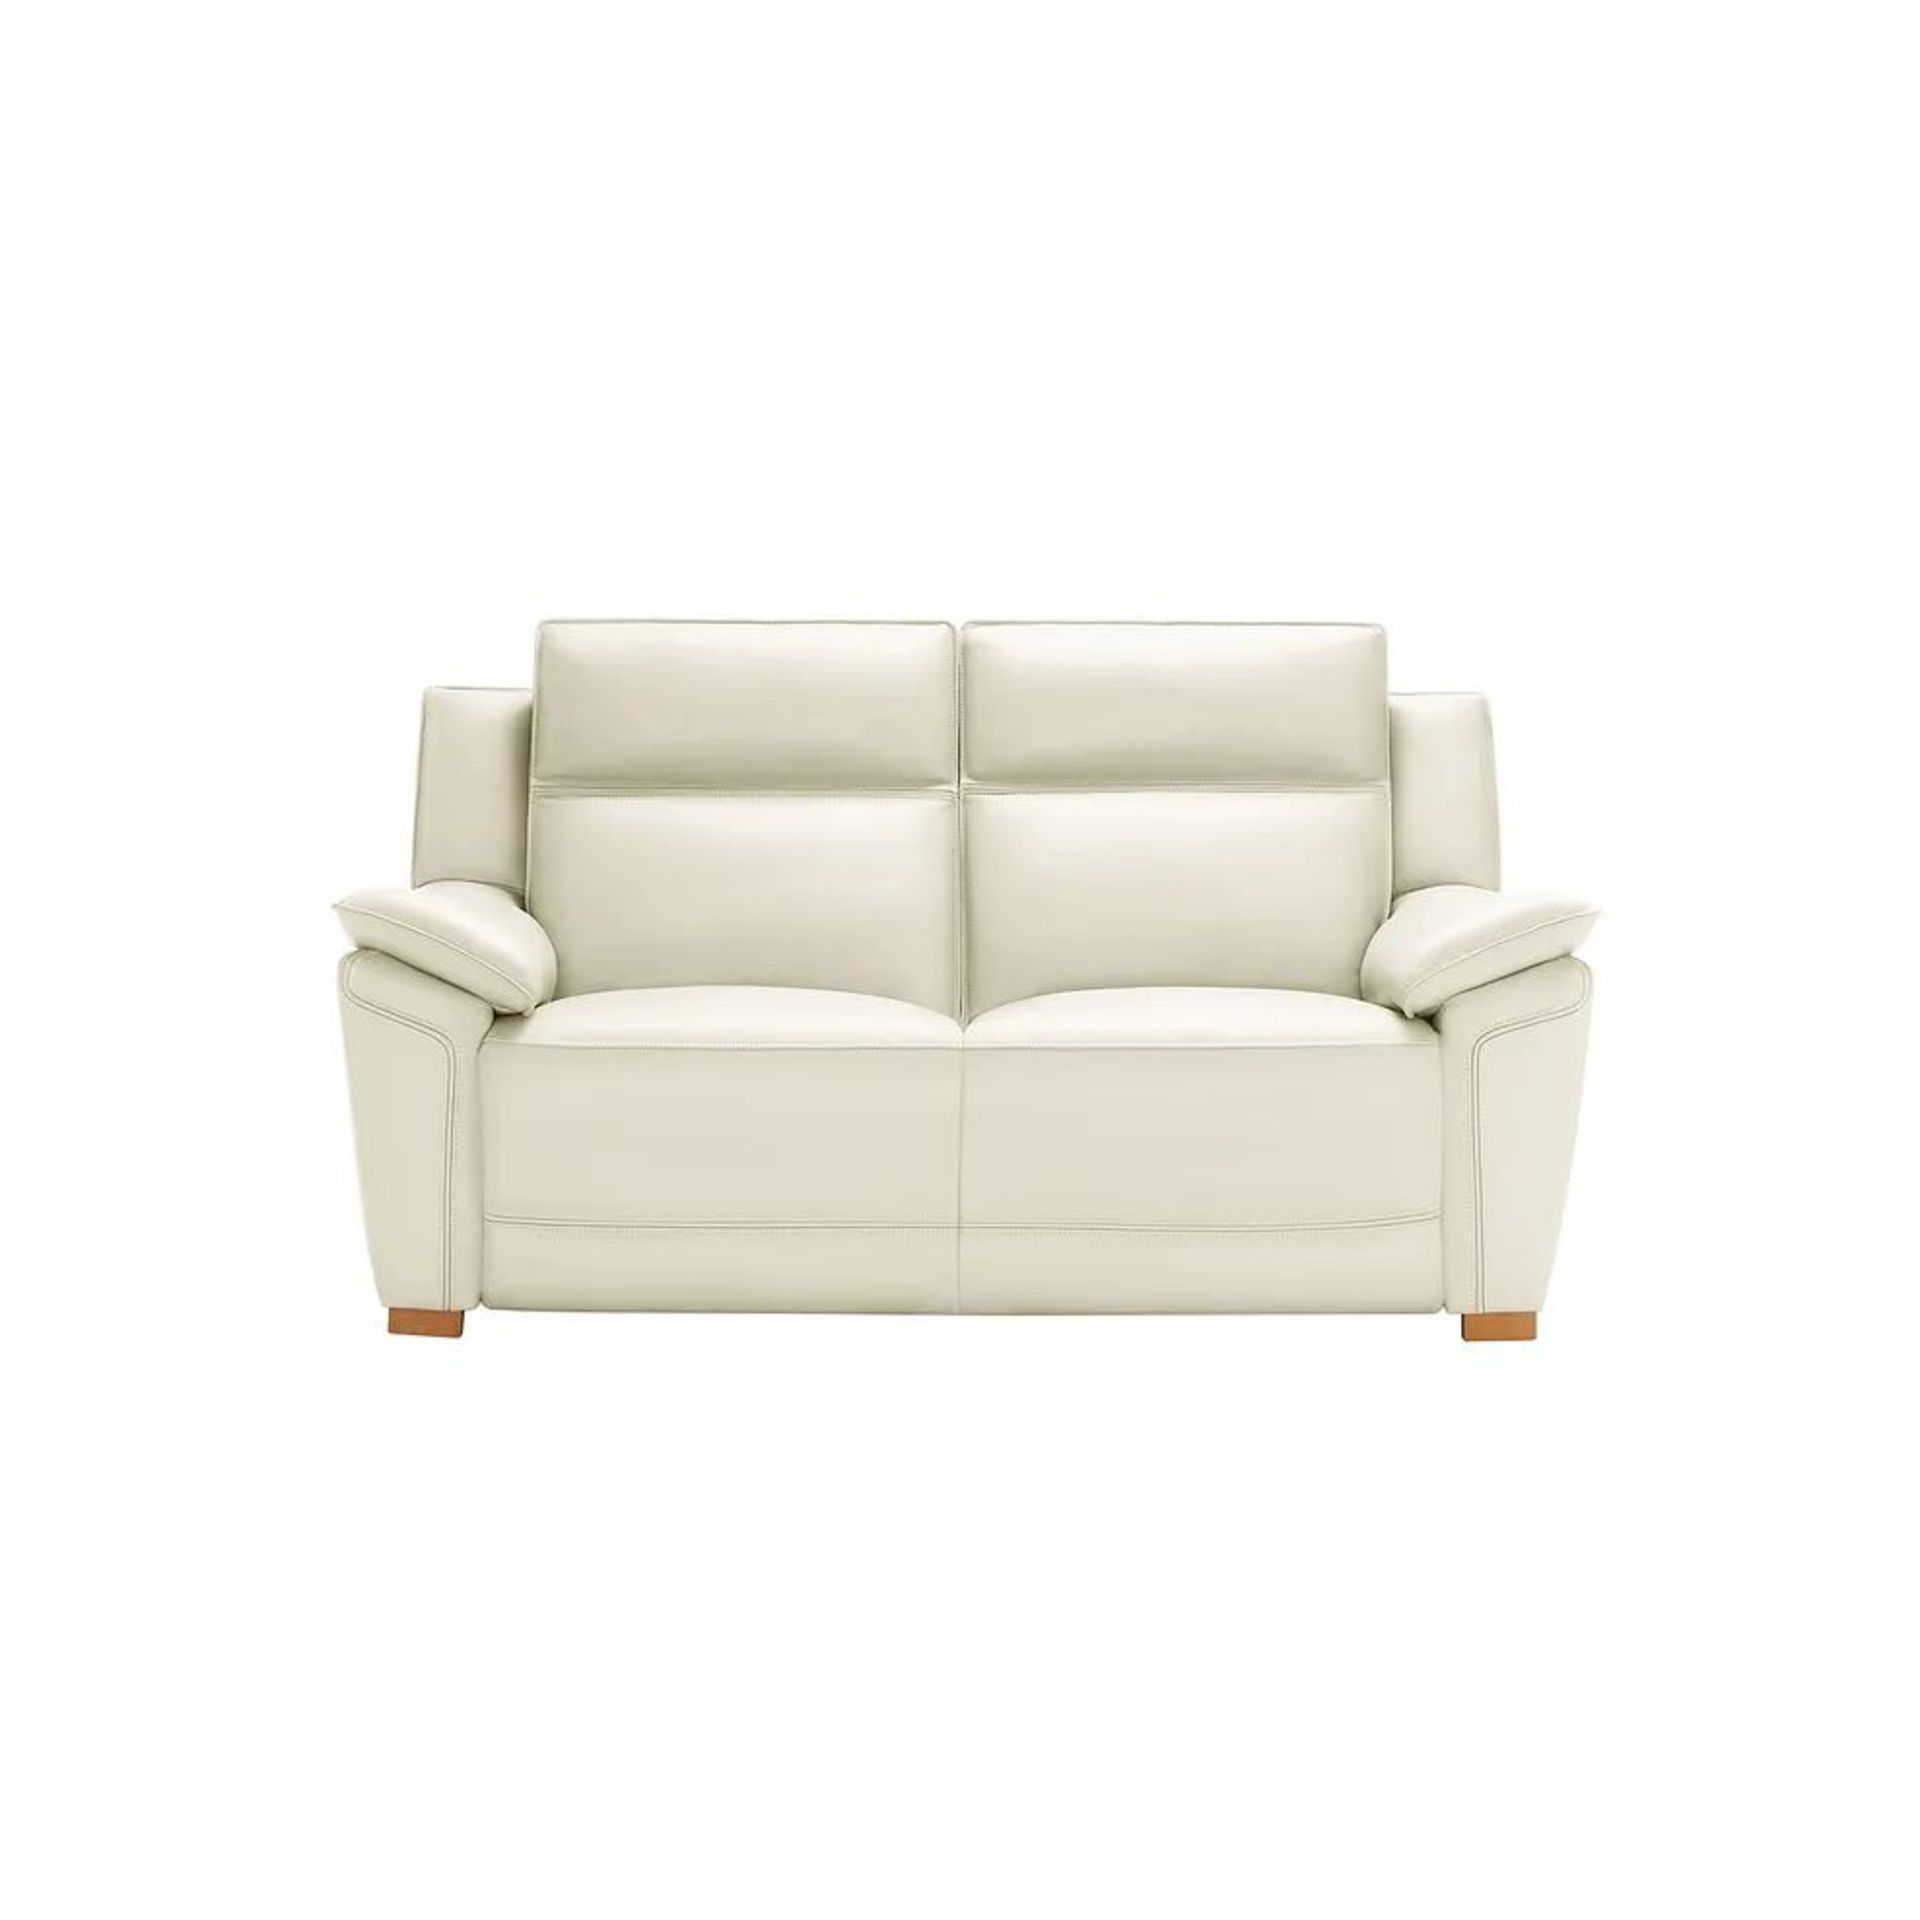 BRAND NEW DUNE 2 Seater Sofa - SNOW WHITE LEATHER. RRP £1579. Pairing comfort with classic design, - Image 2 of 8